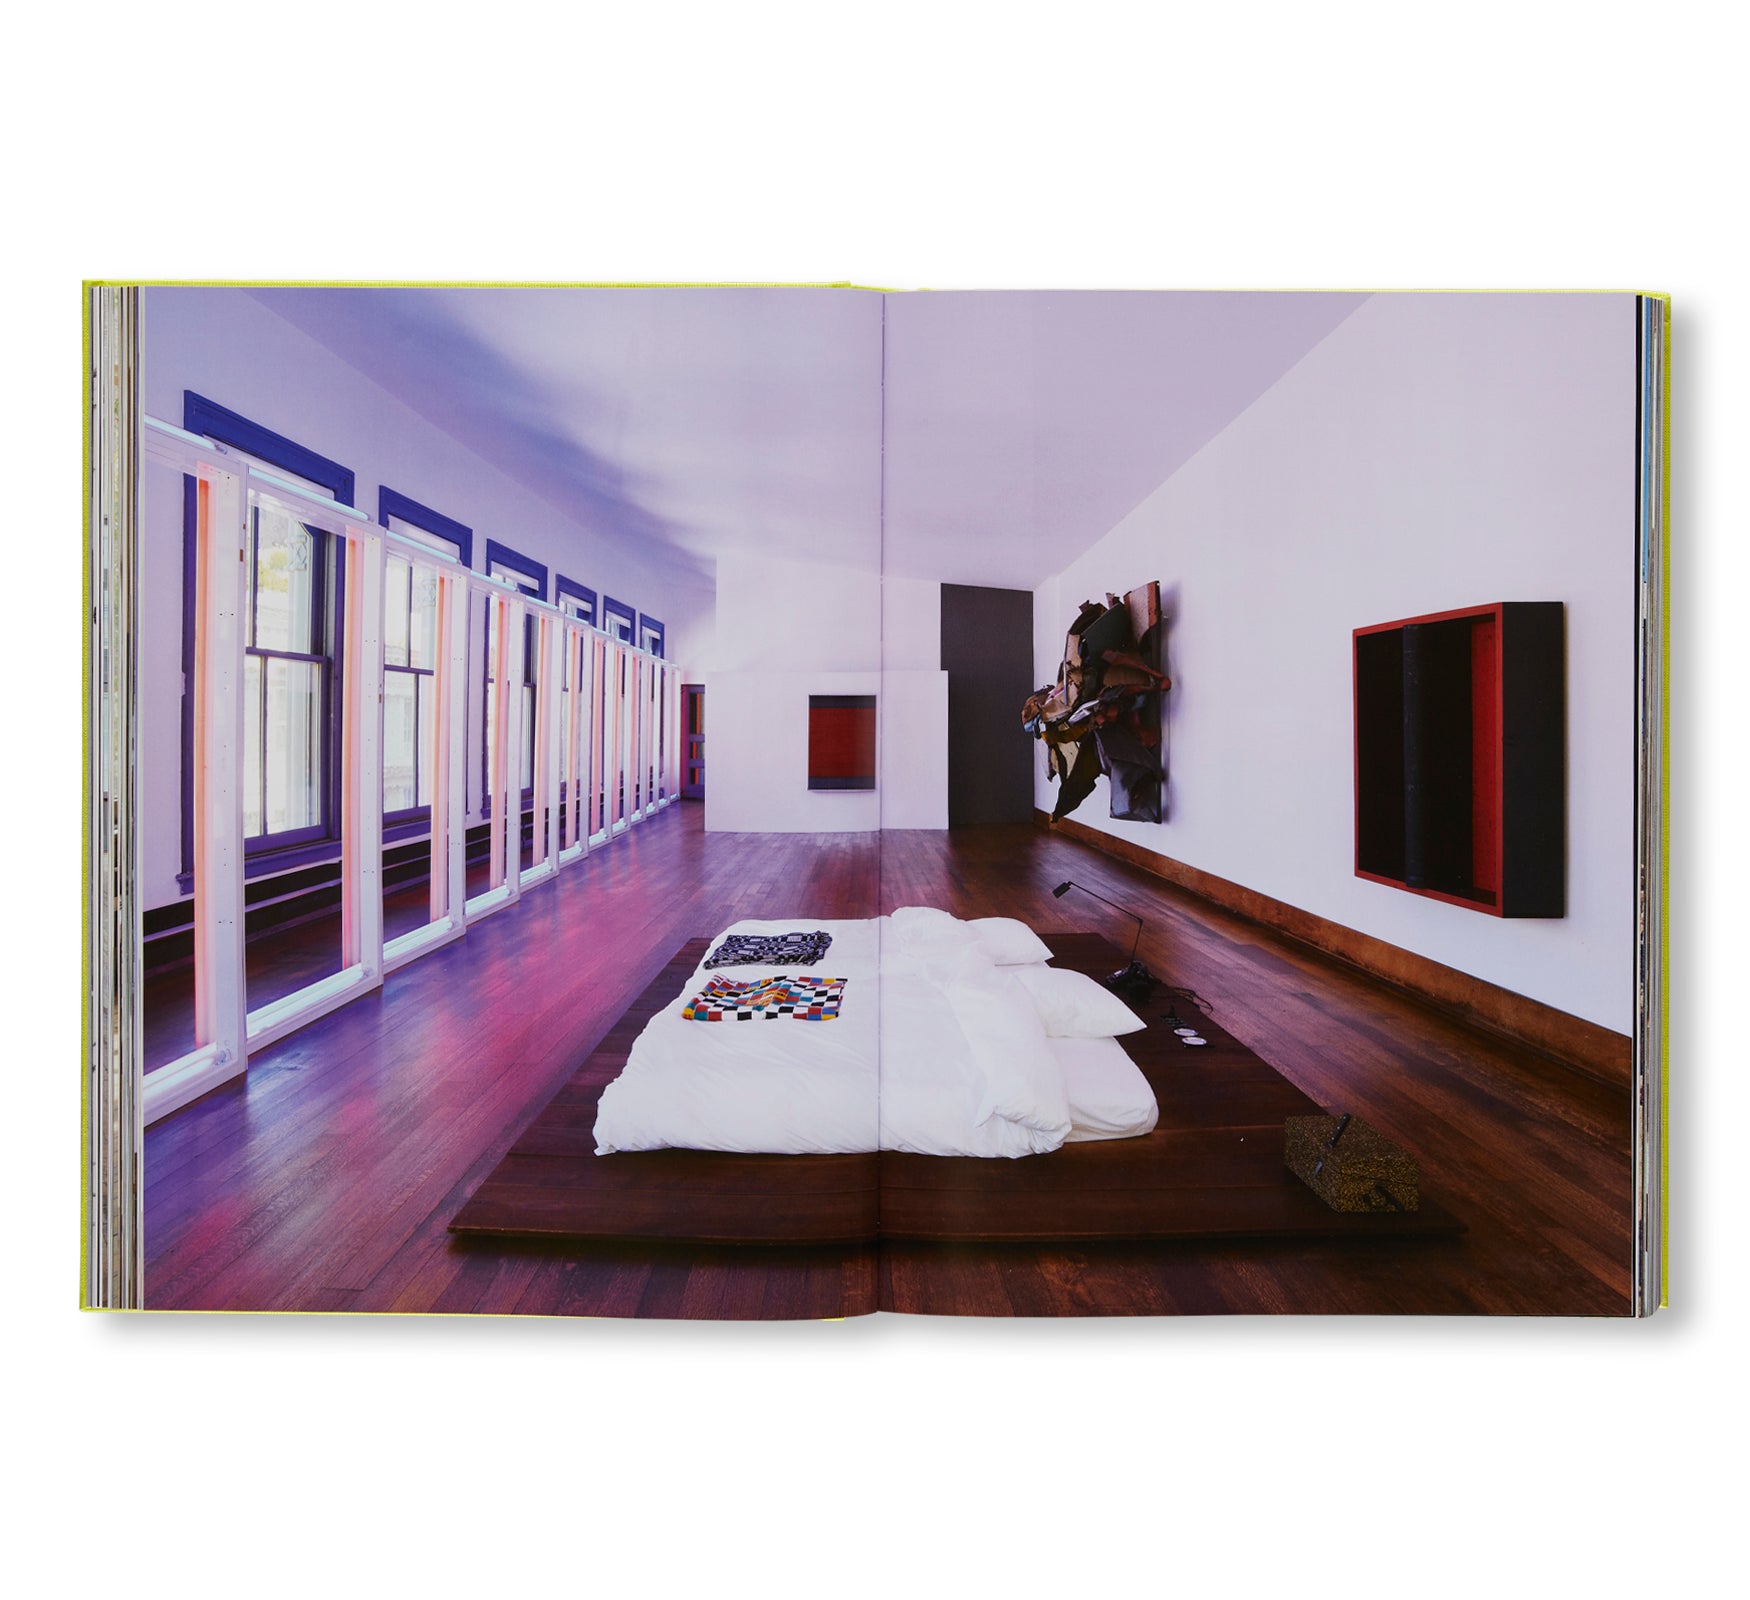 DONALD JUDD SPACES by Donald Judd